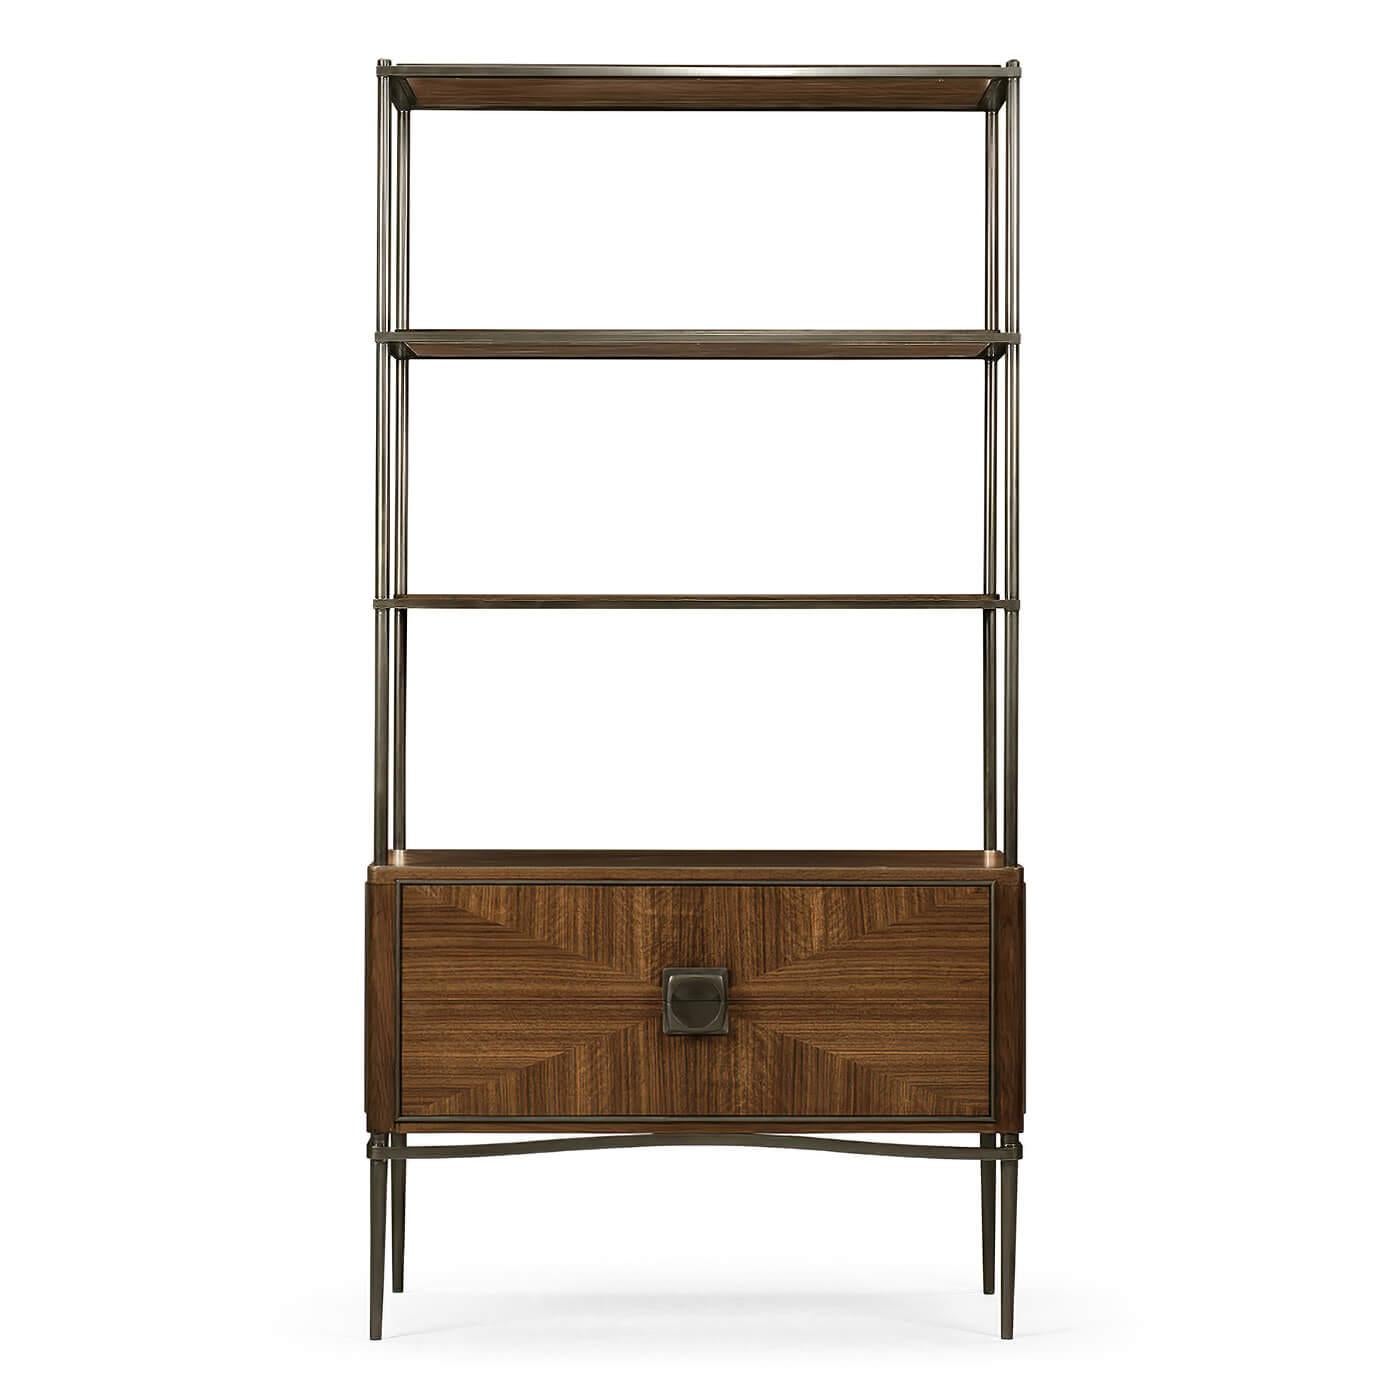 A Mid-Century modern style walnut etagere. Constructed of American walnut with a transparent, lacquer finish. The doors feature quartered walnut veneer in a box pattern. The brass frame, legs, and hardware are cast in acid, dipped, and hand-rubbed